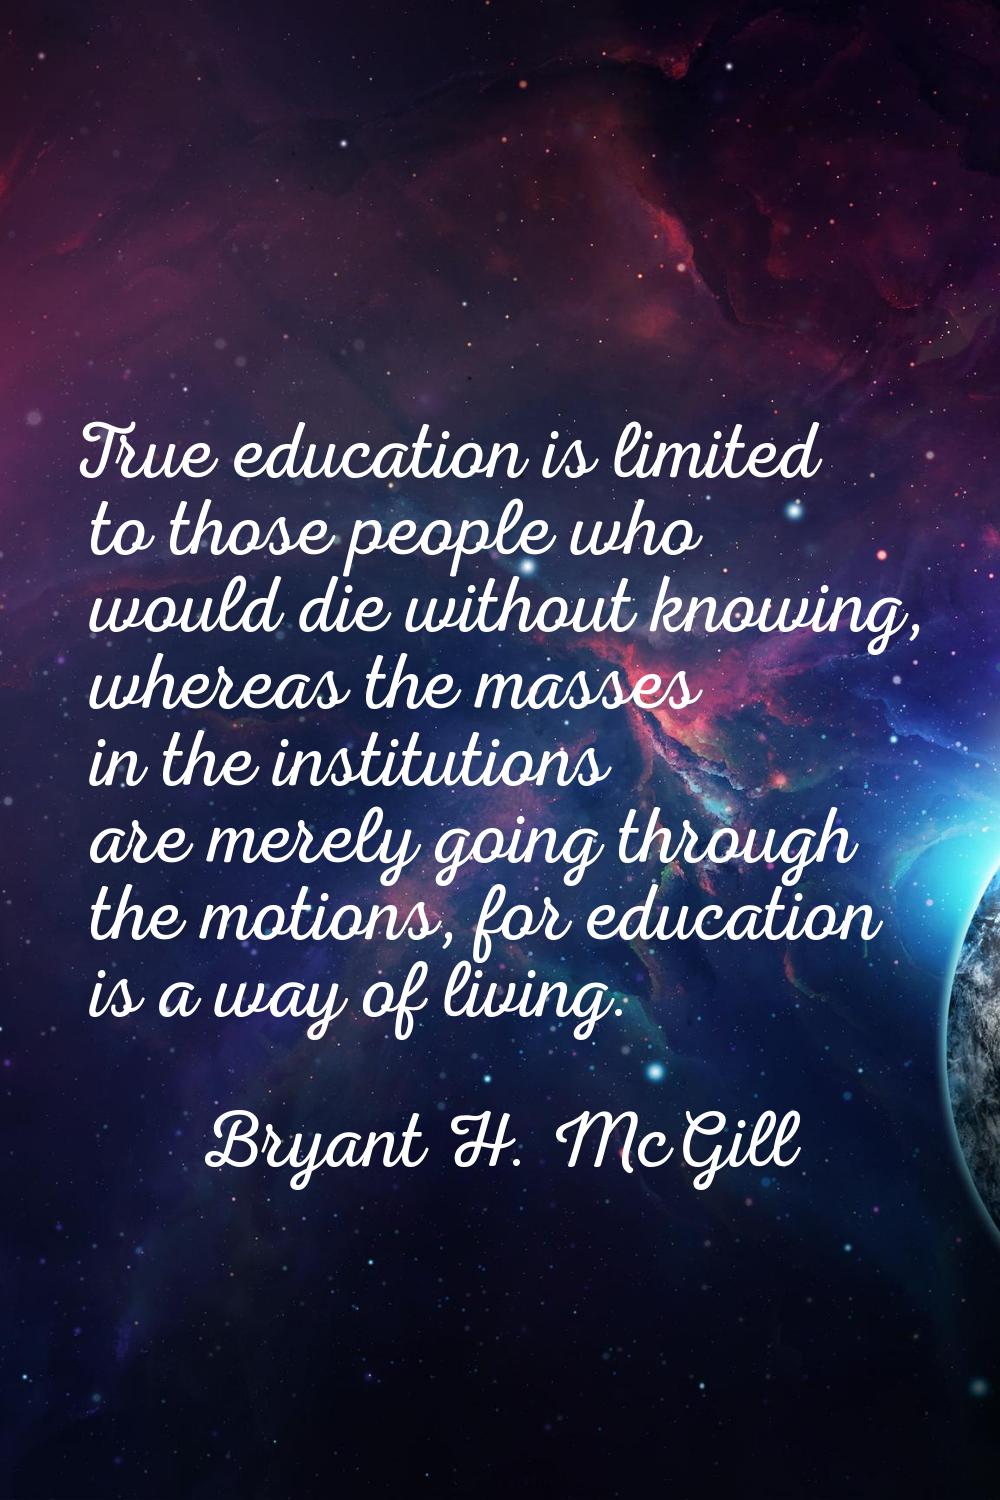 True education is limited to those people who would die without knowing, whereas the masses in the 